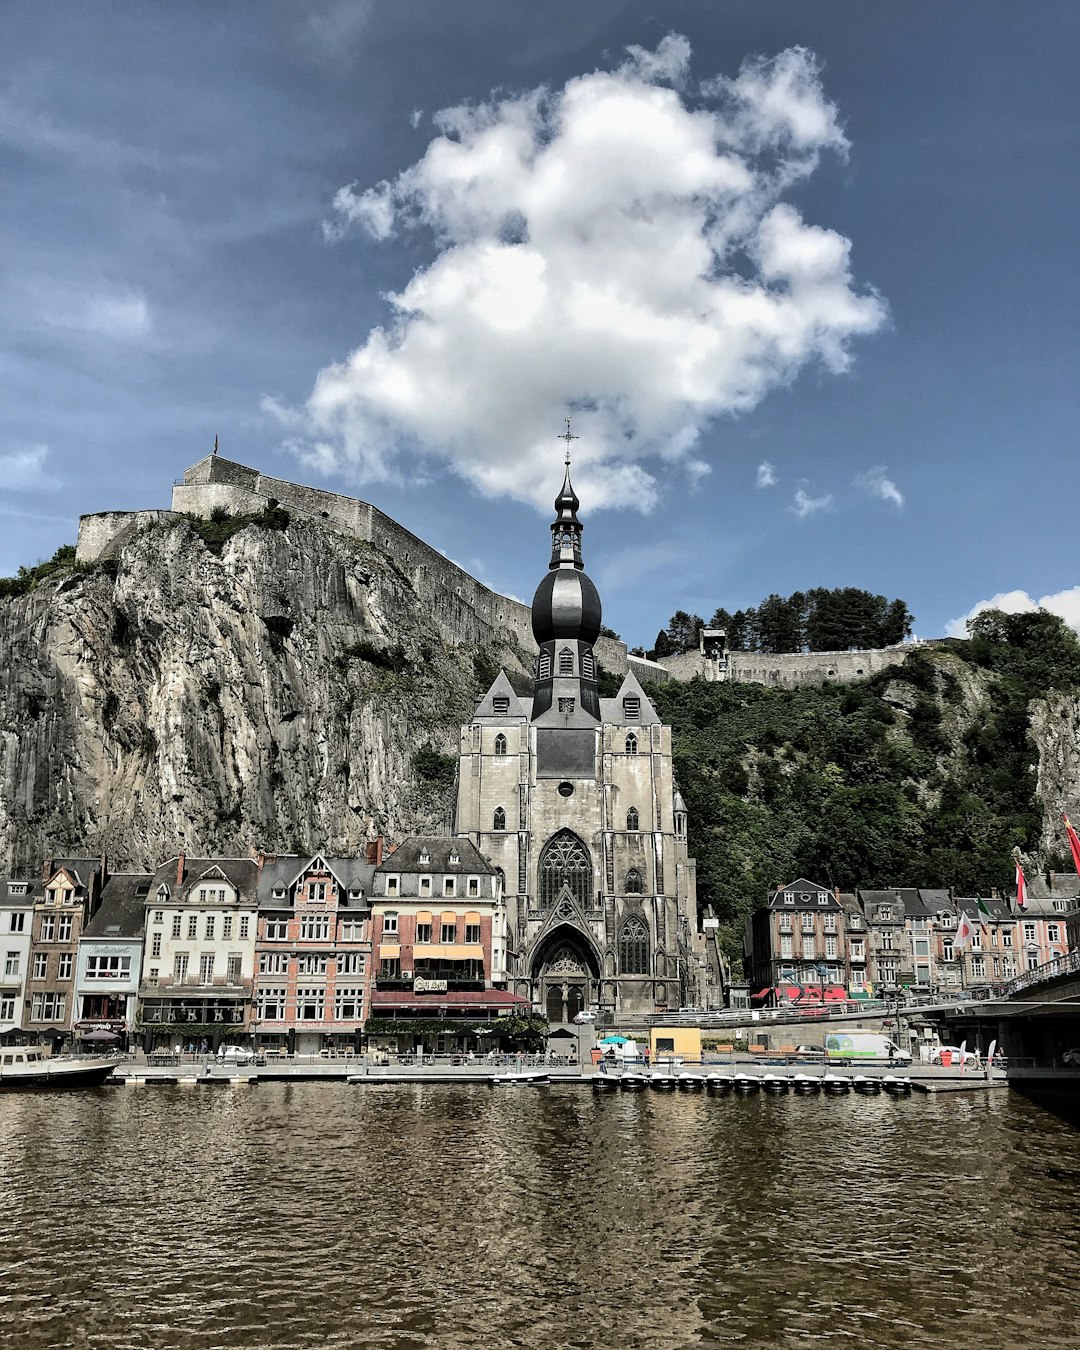 Travel Tips and Stories of Dinant in Belgium